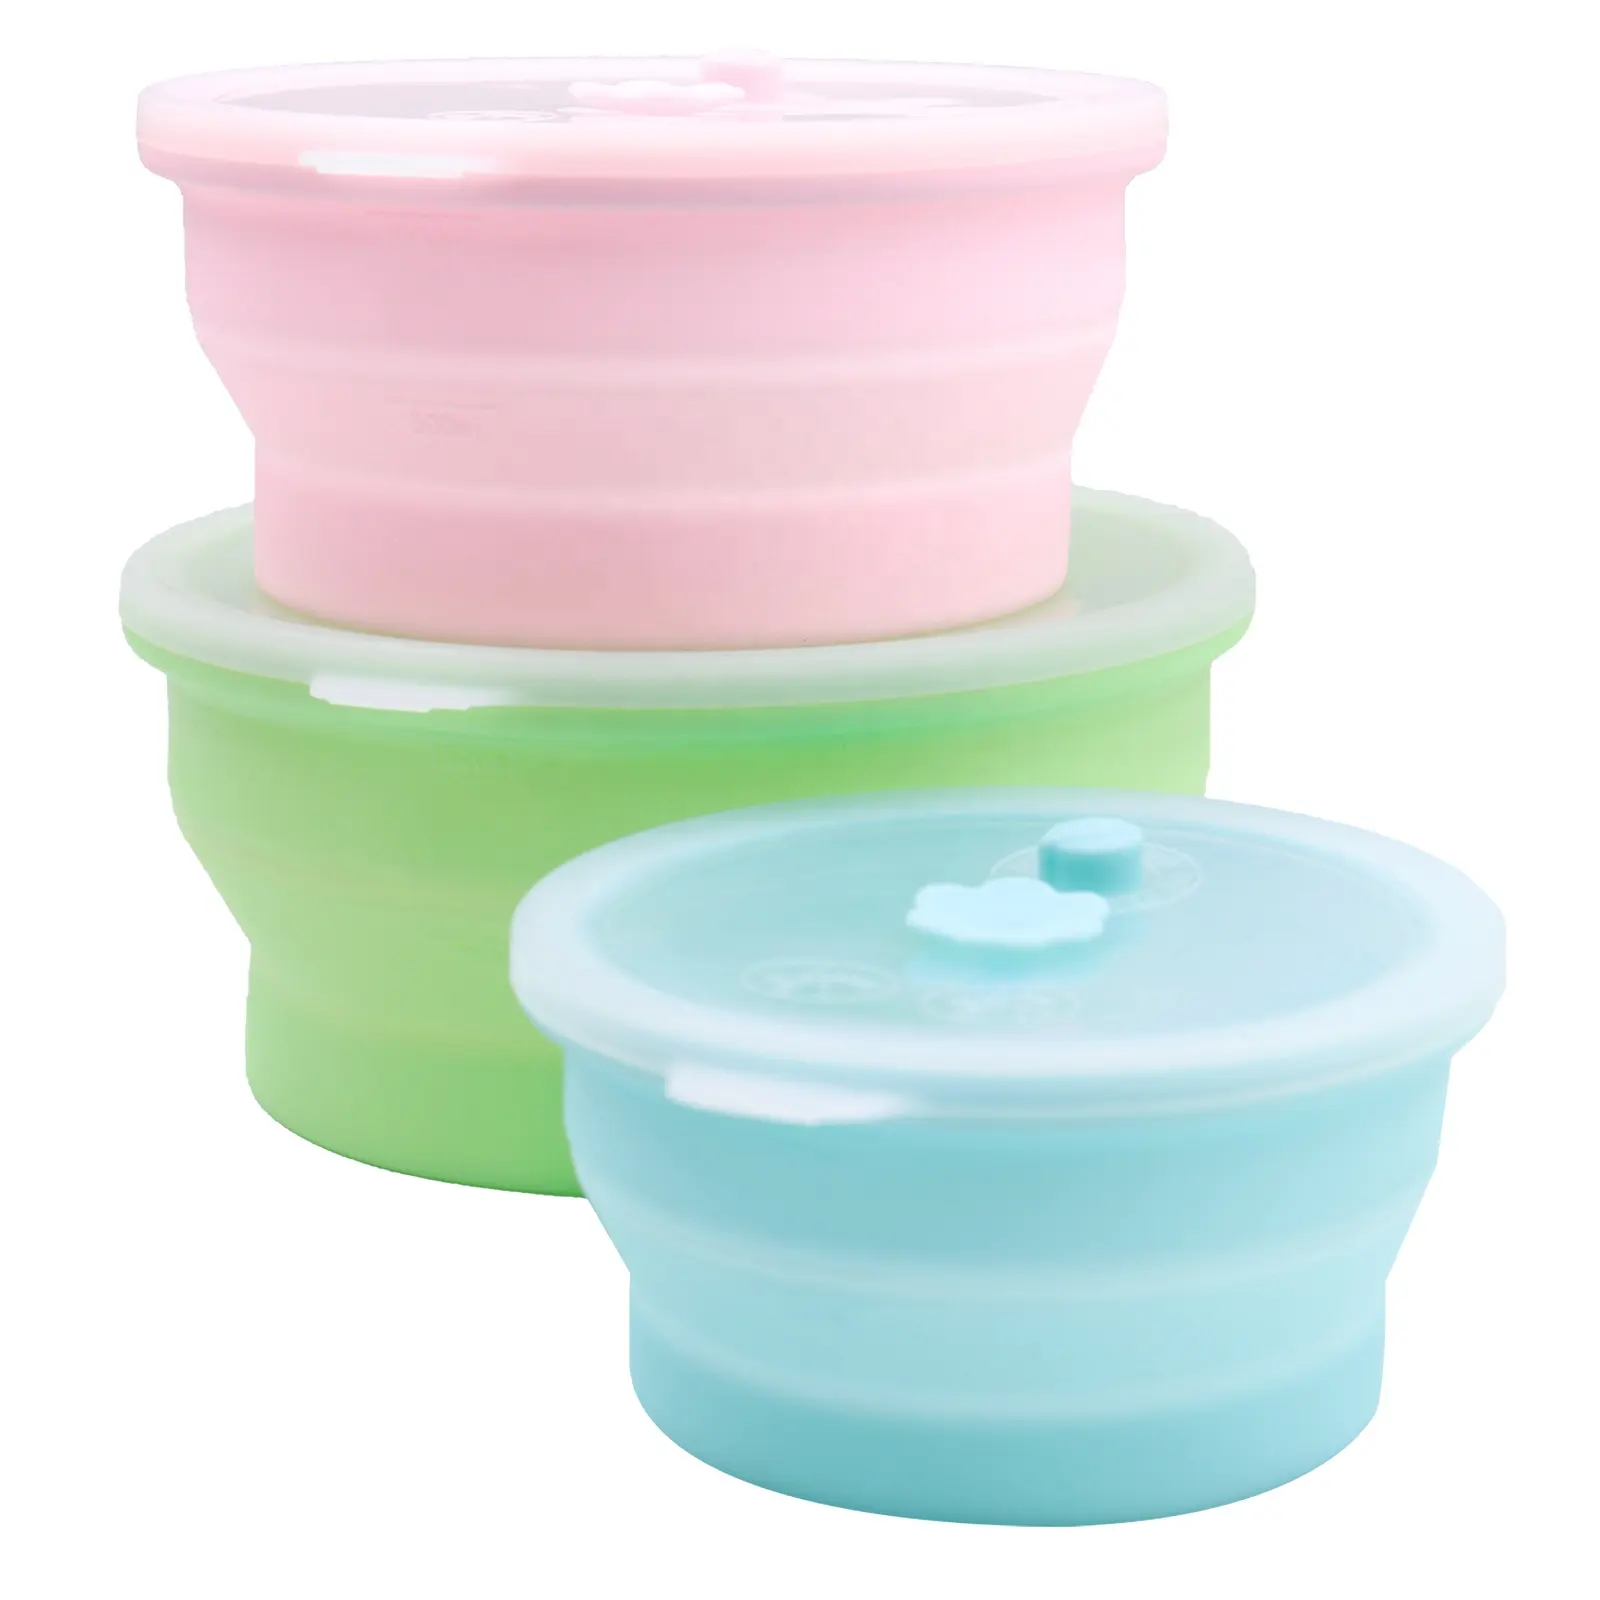 Bpa Free Foldable Silicone Lunch Boxes for Kids Collapsible Airtight Food Storage Containers with Silicone Lid